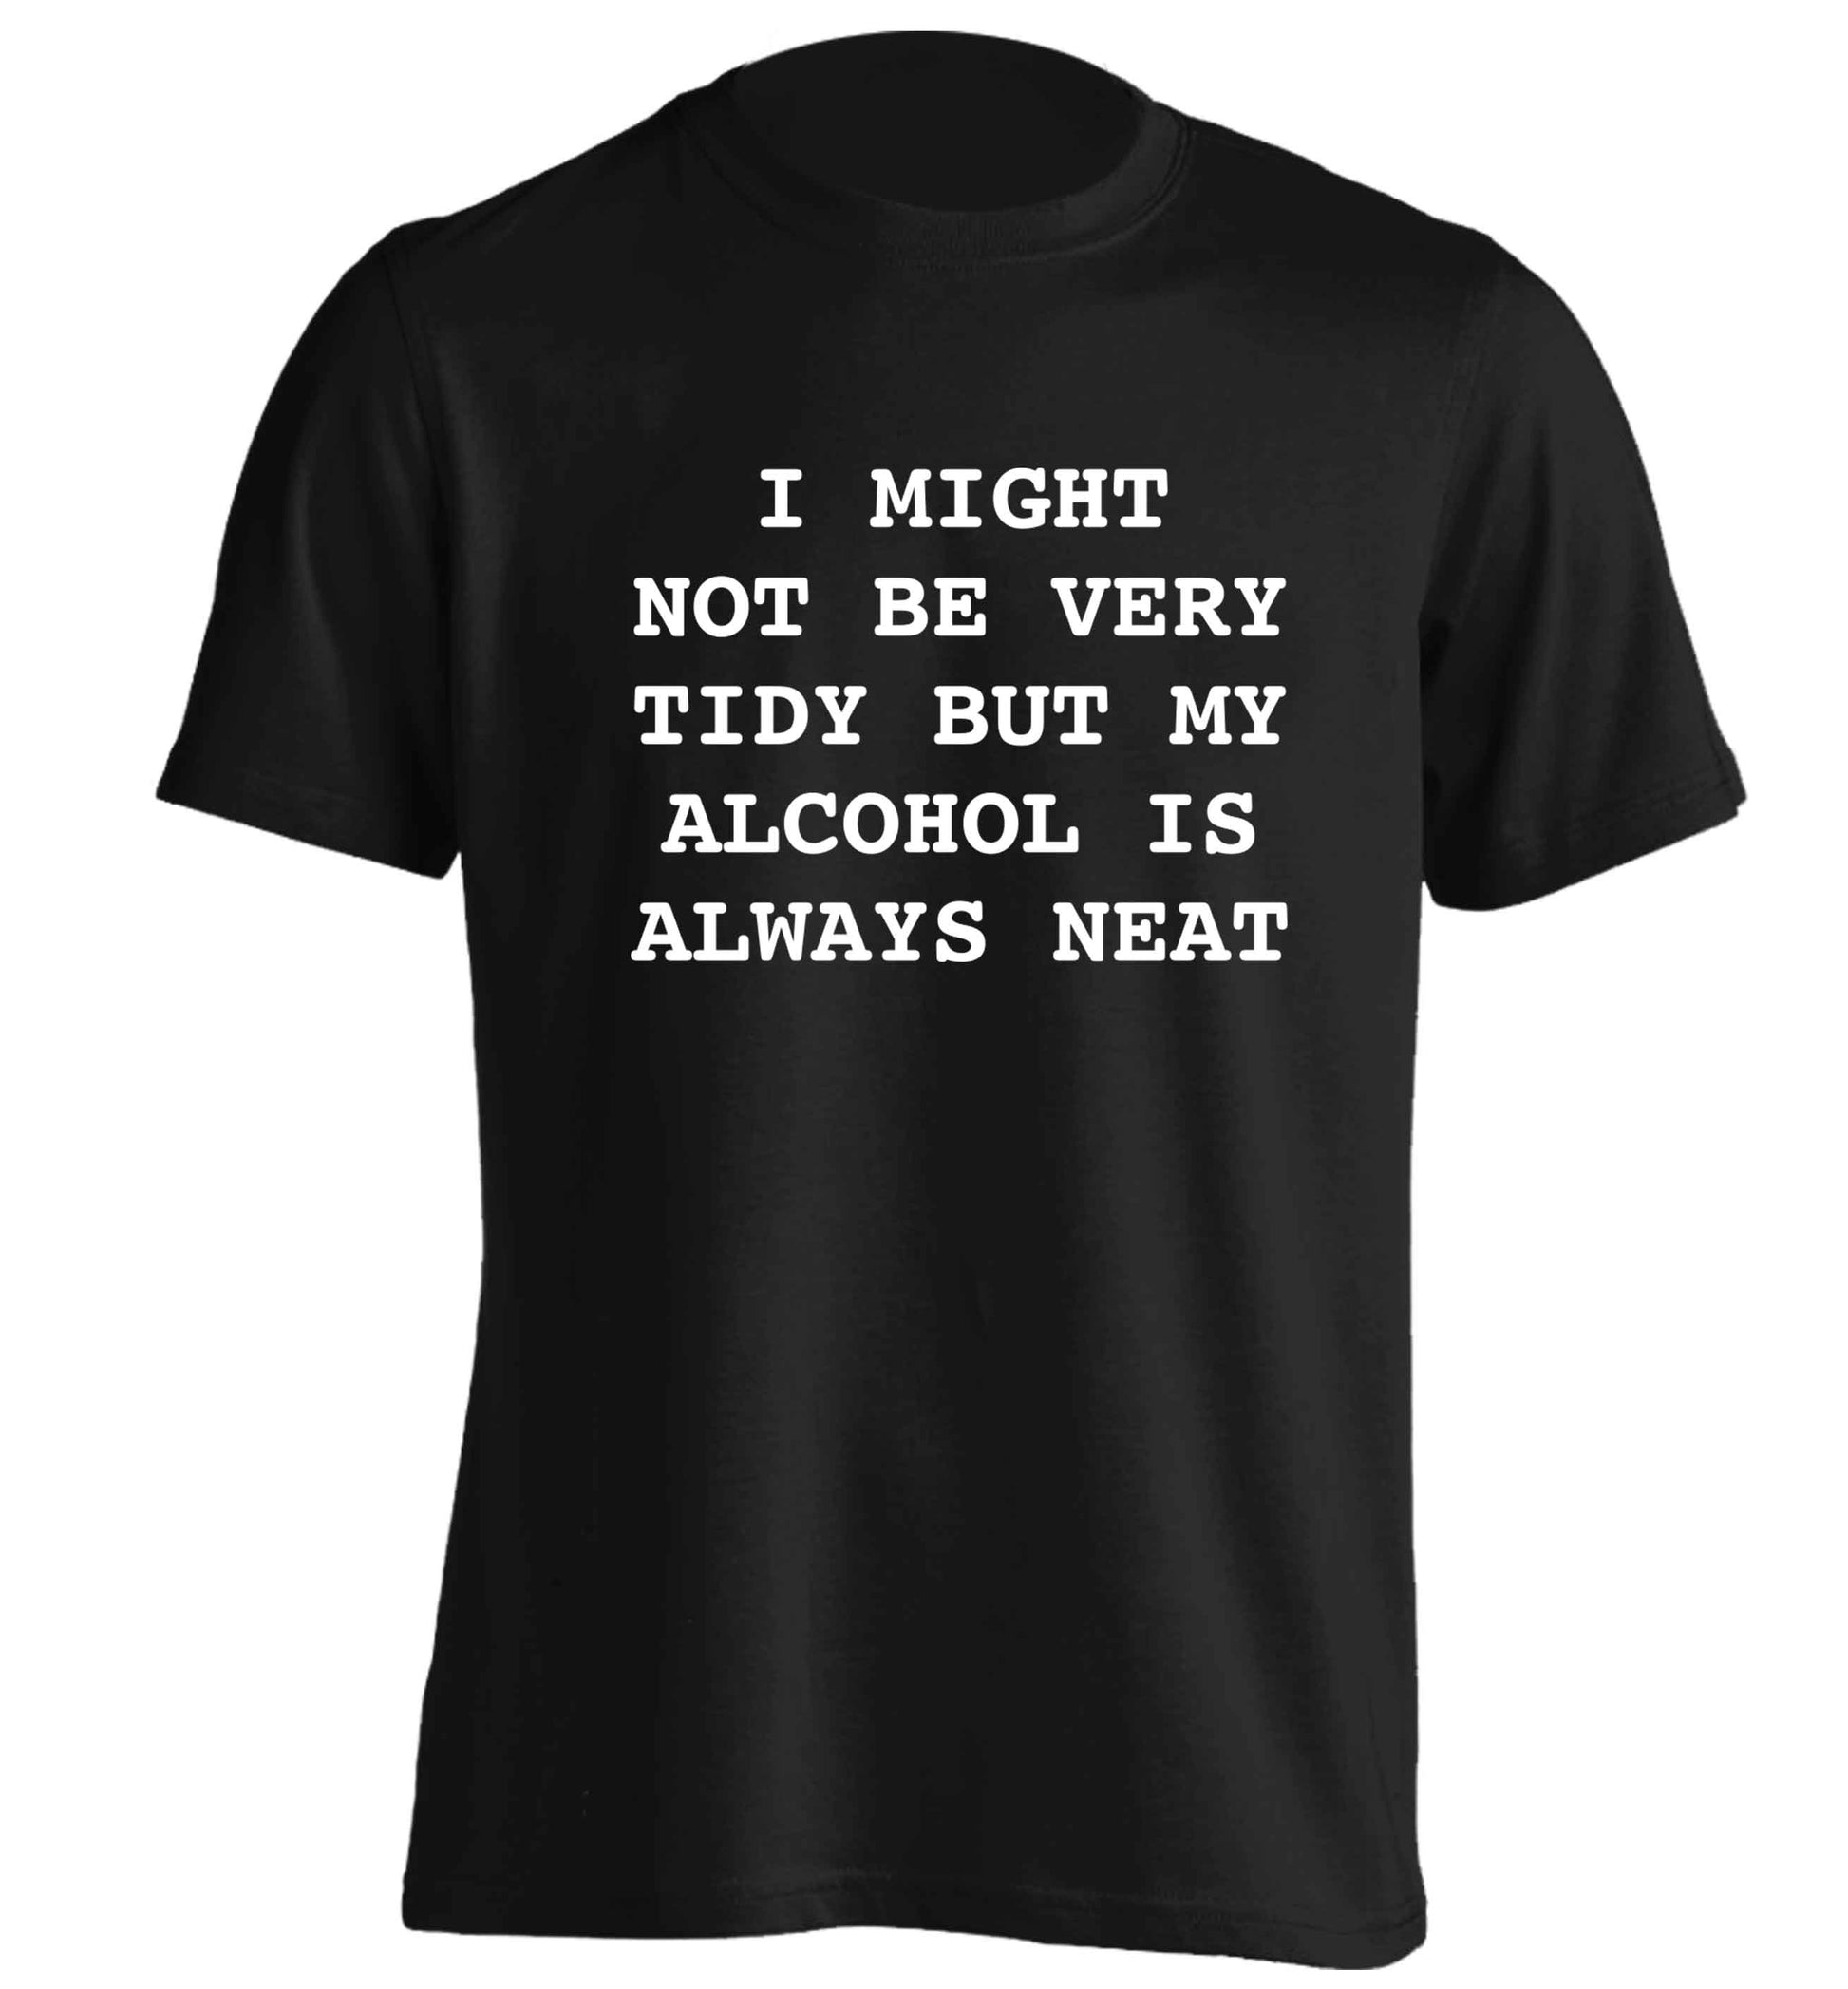 I might not be tidy but my alcohol is always neat adults unisex black Tshirt 2XL